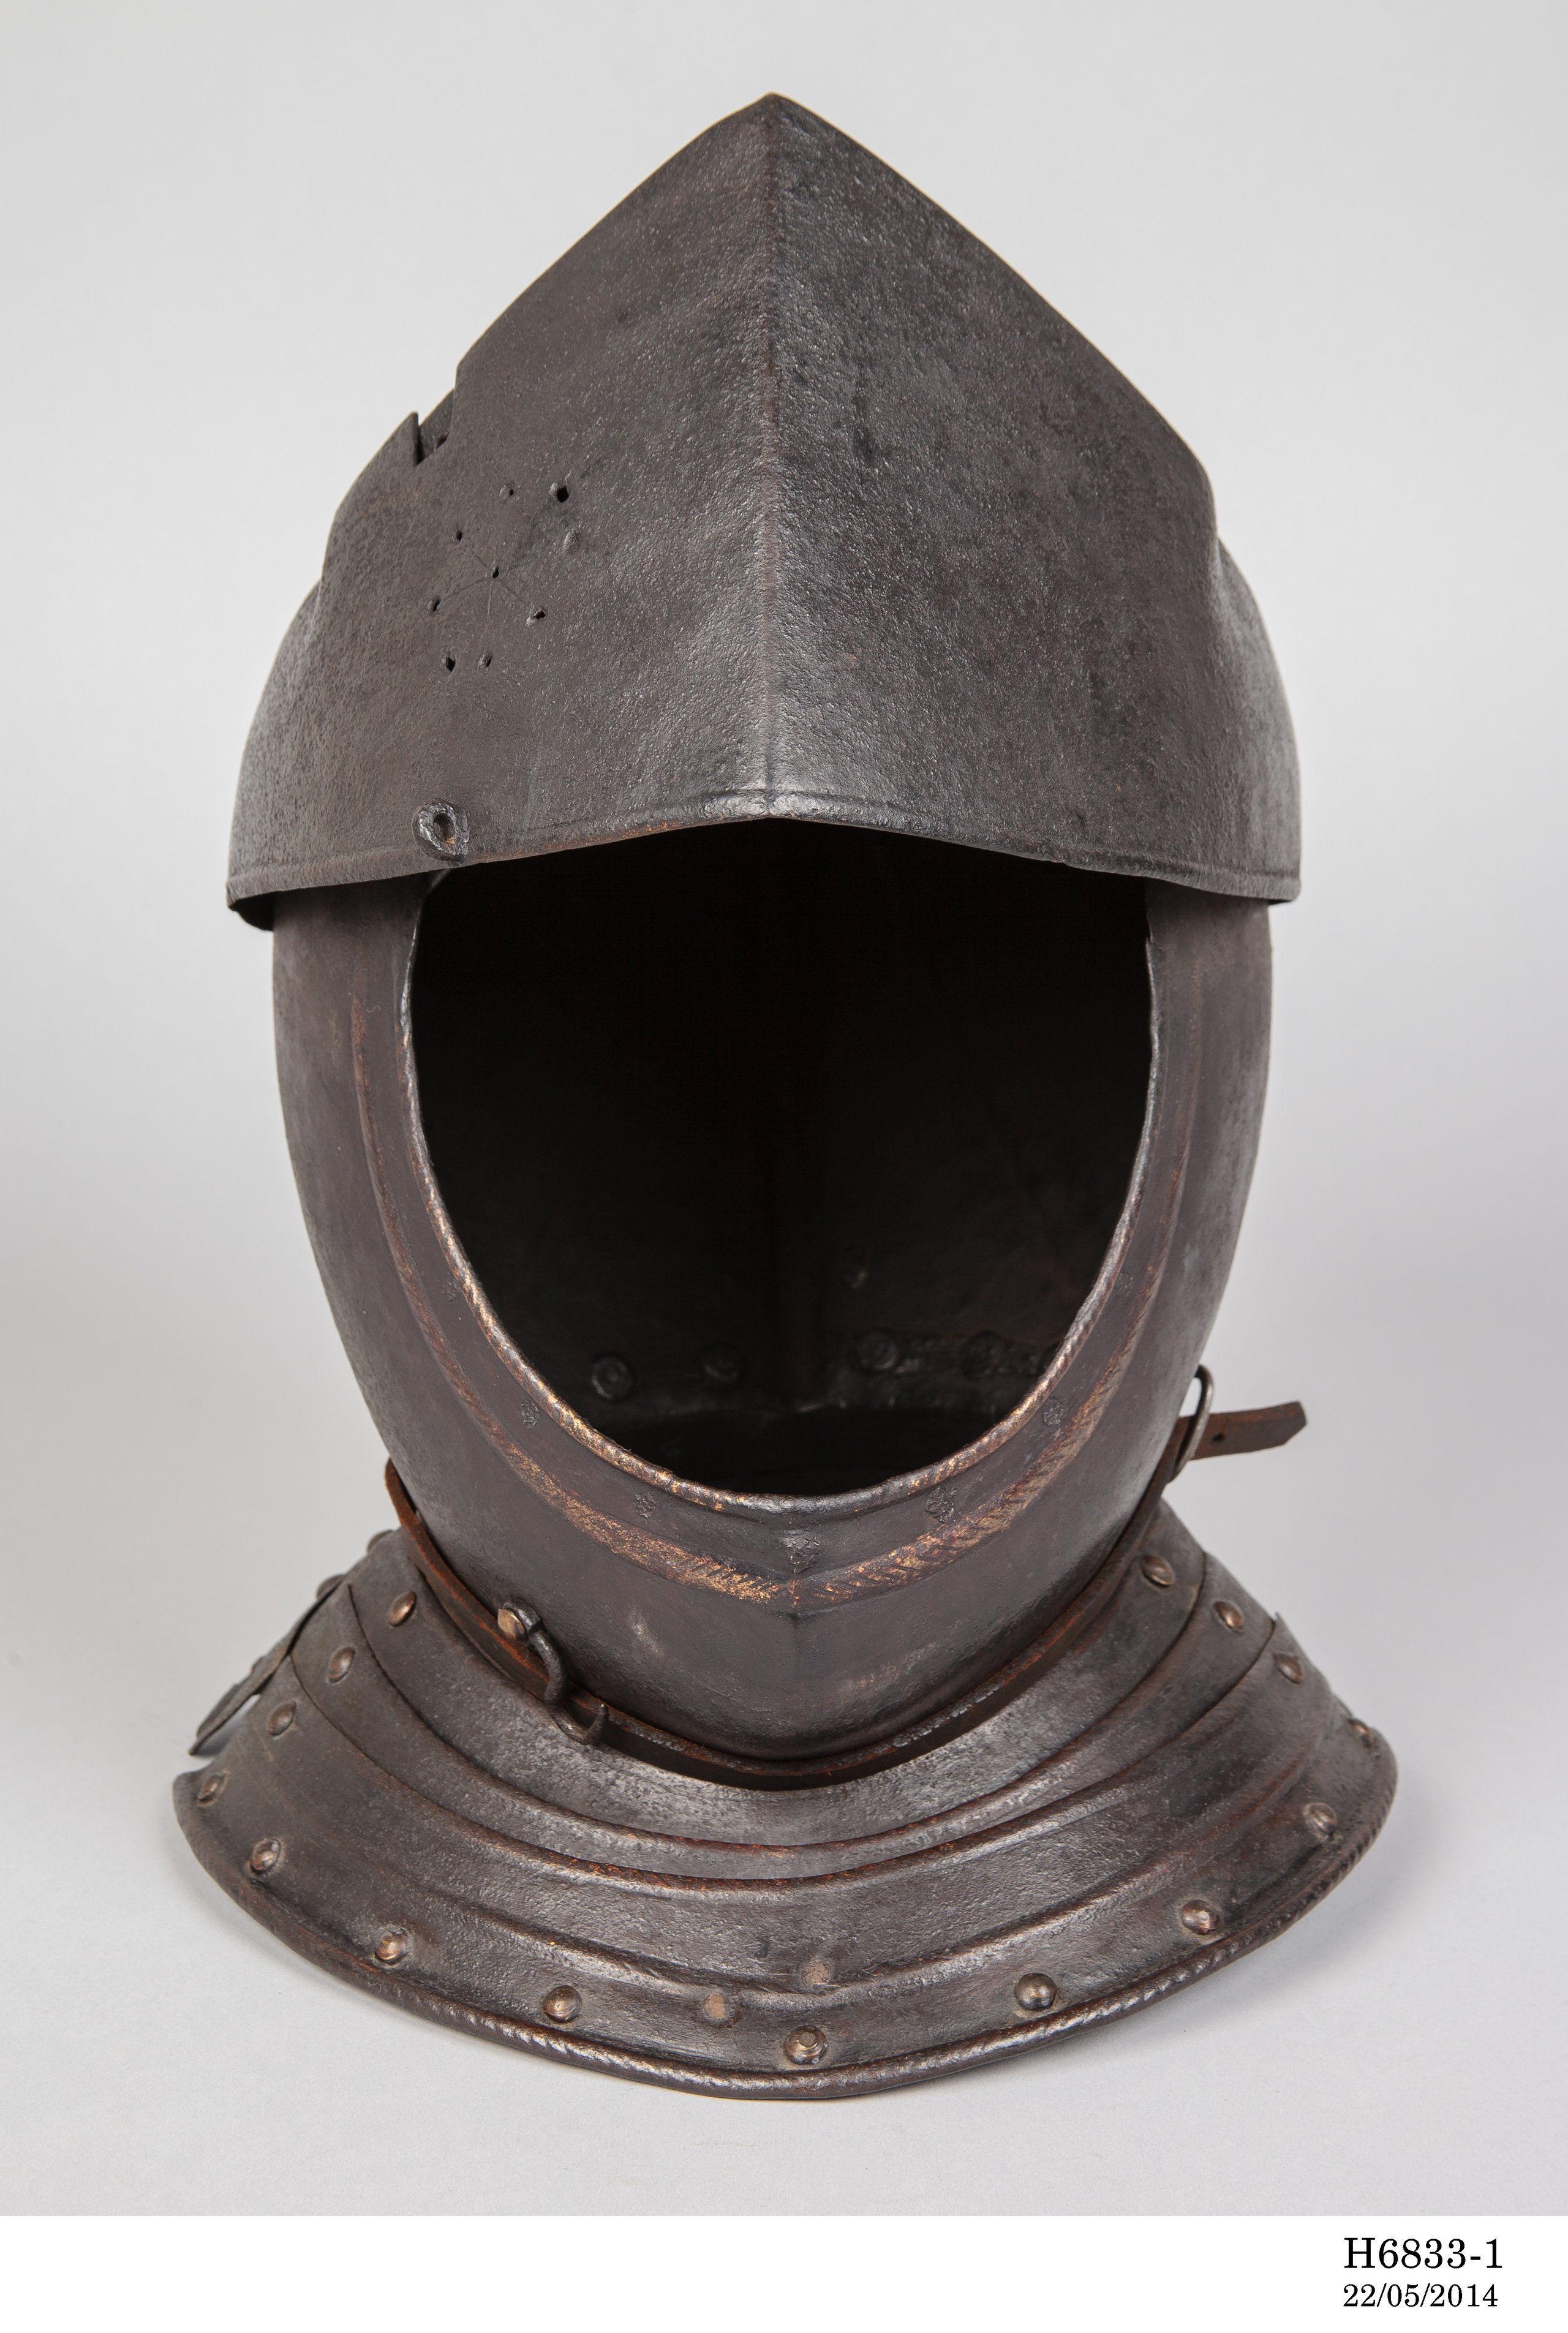 Helmet from suit of armour